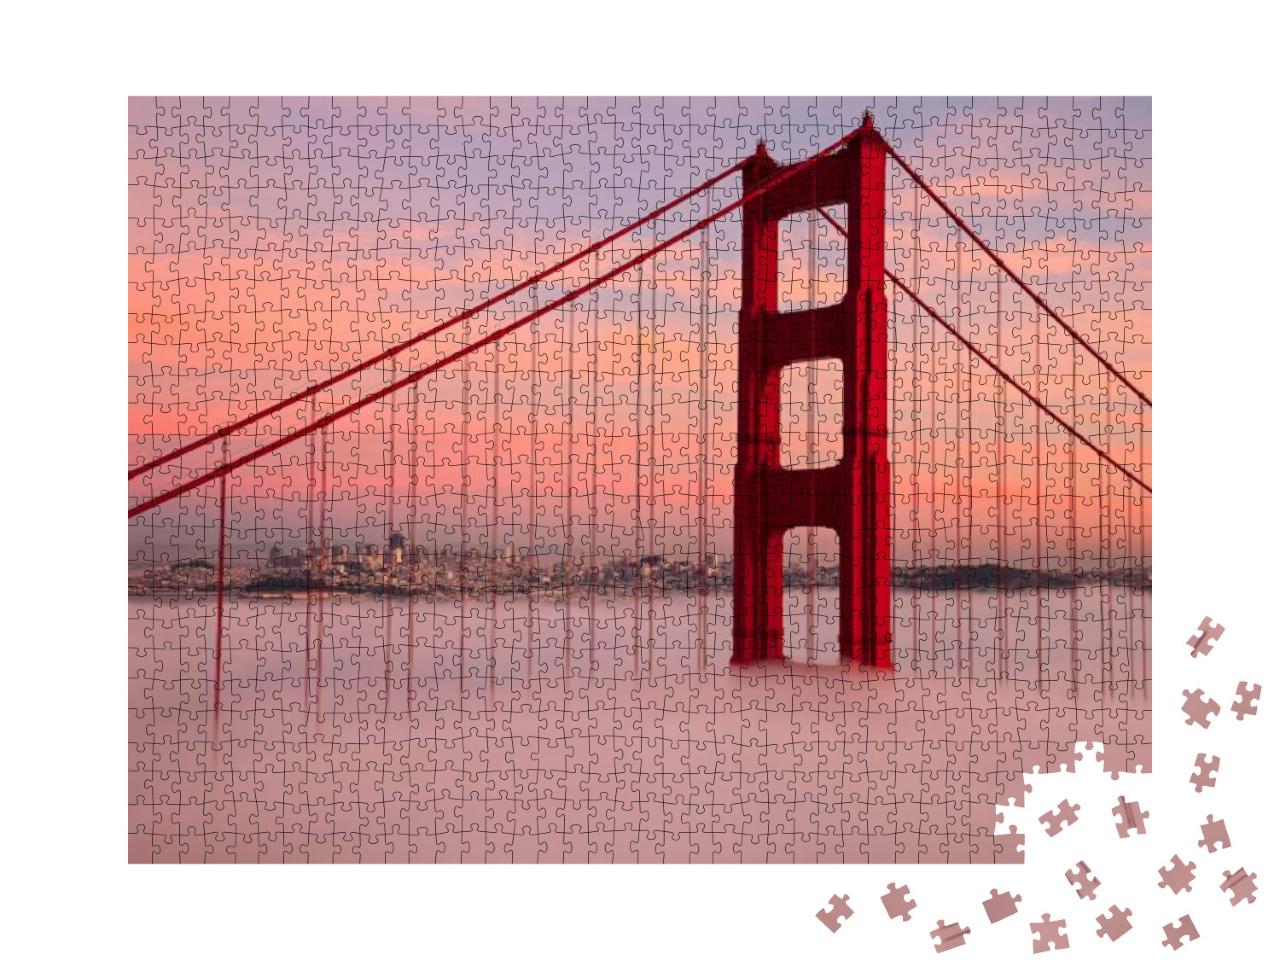 First Tower of the Golden Gate Bridge in Fog... Jigsaw Puzzle with 1000 pieces